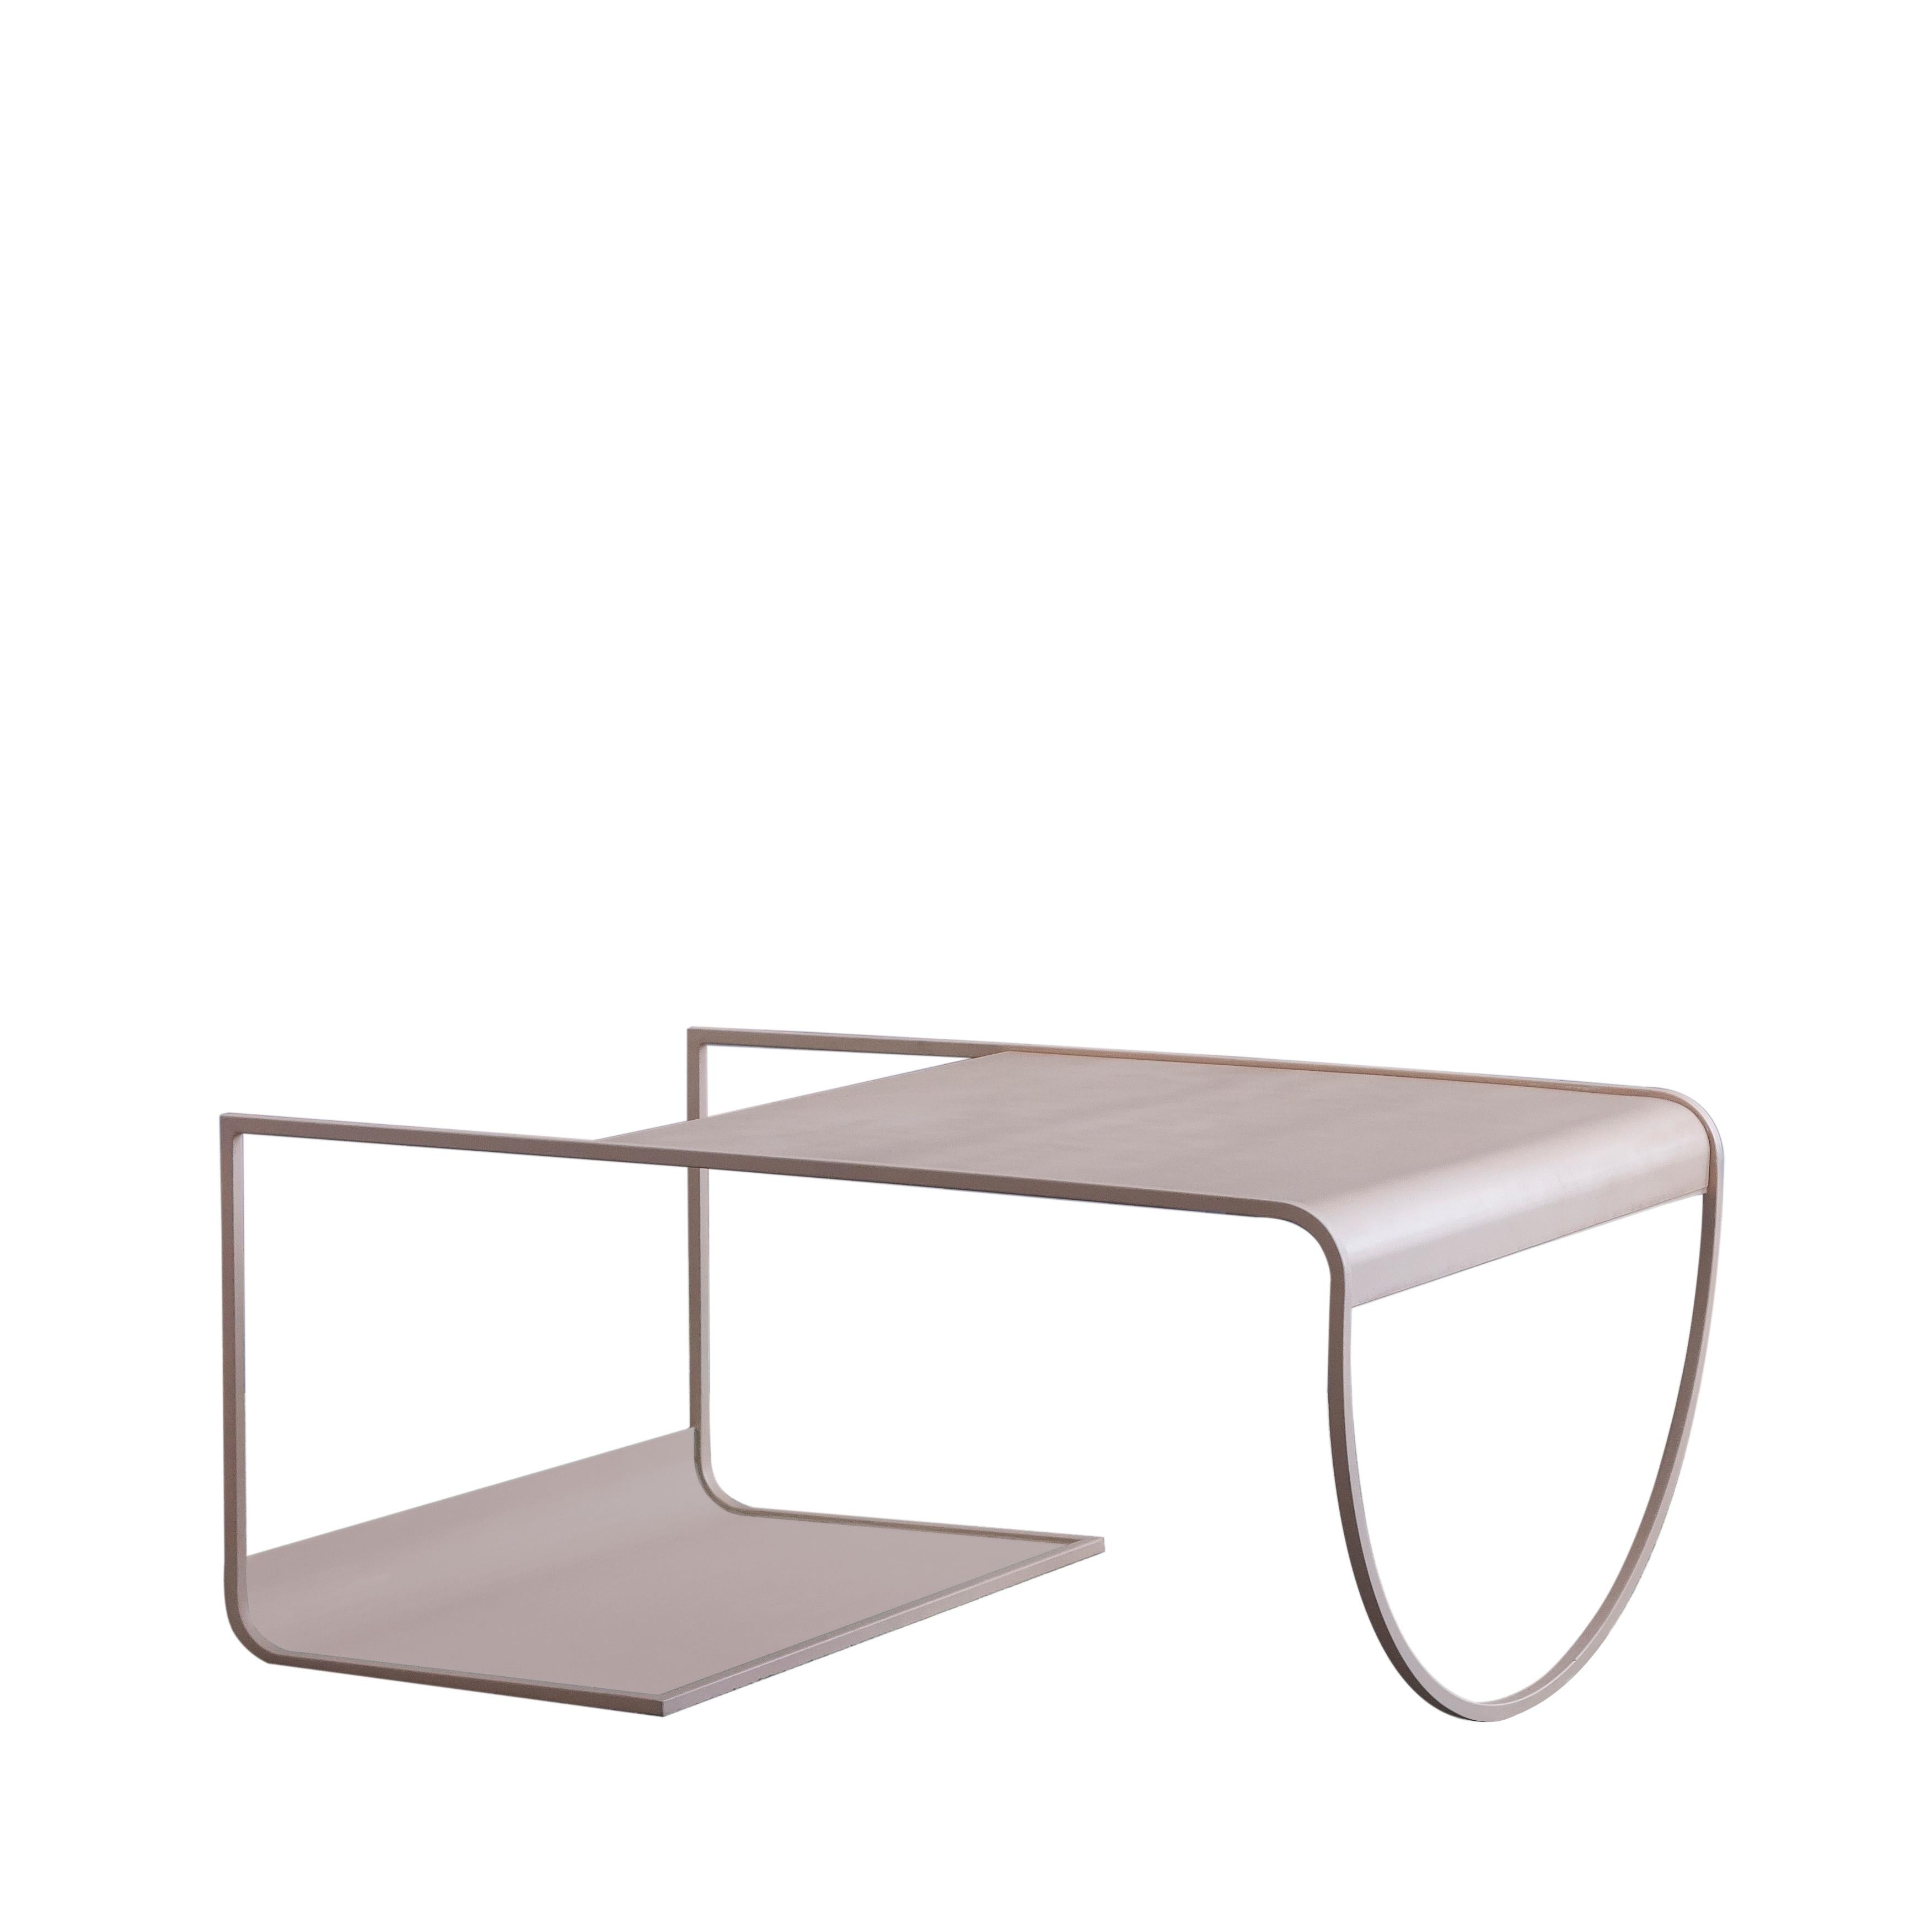 https://a.1stdibscdn.com/minimalist-sw-coffee-table-in-powder-coated-steel-by-soft-geometry-for-sale/f_37133/f_145621211677533931036/SW_table_WB_master.jpg